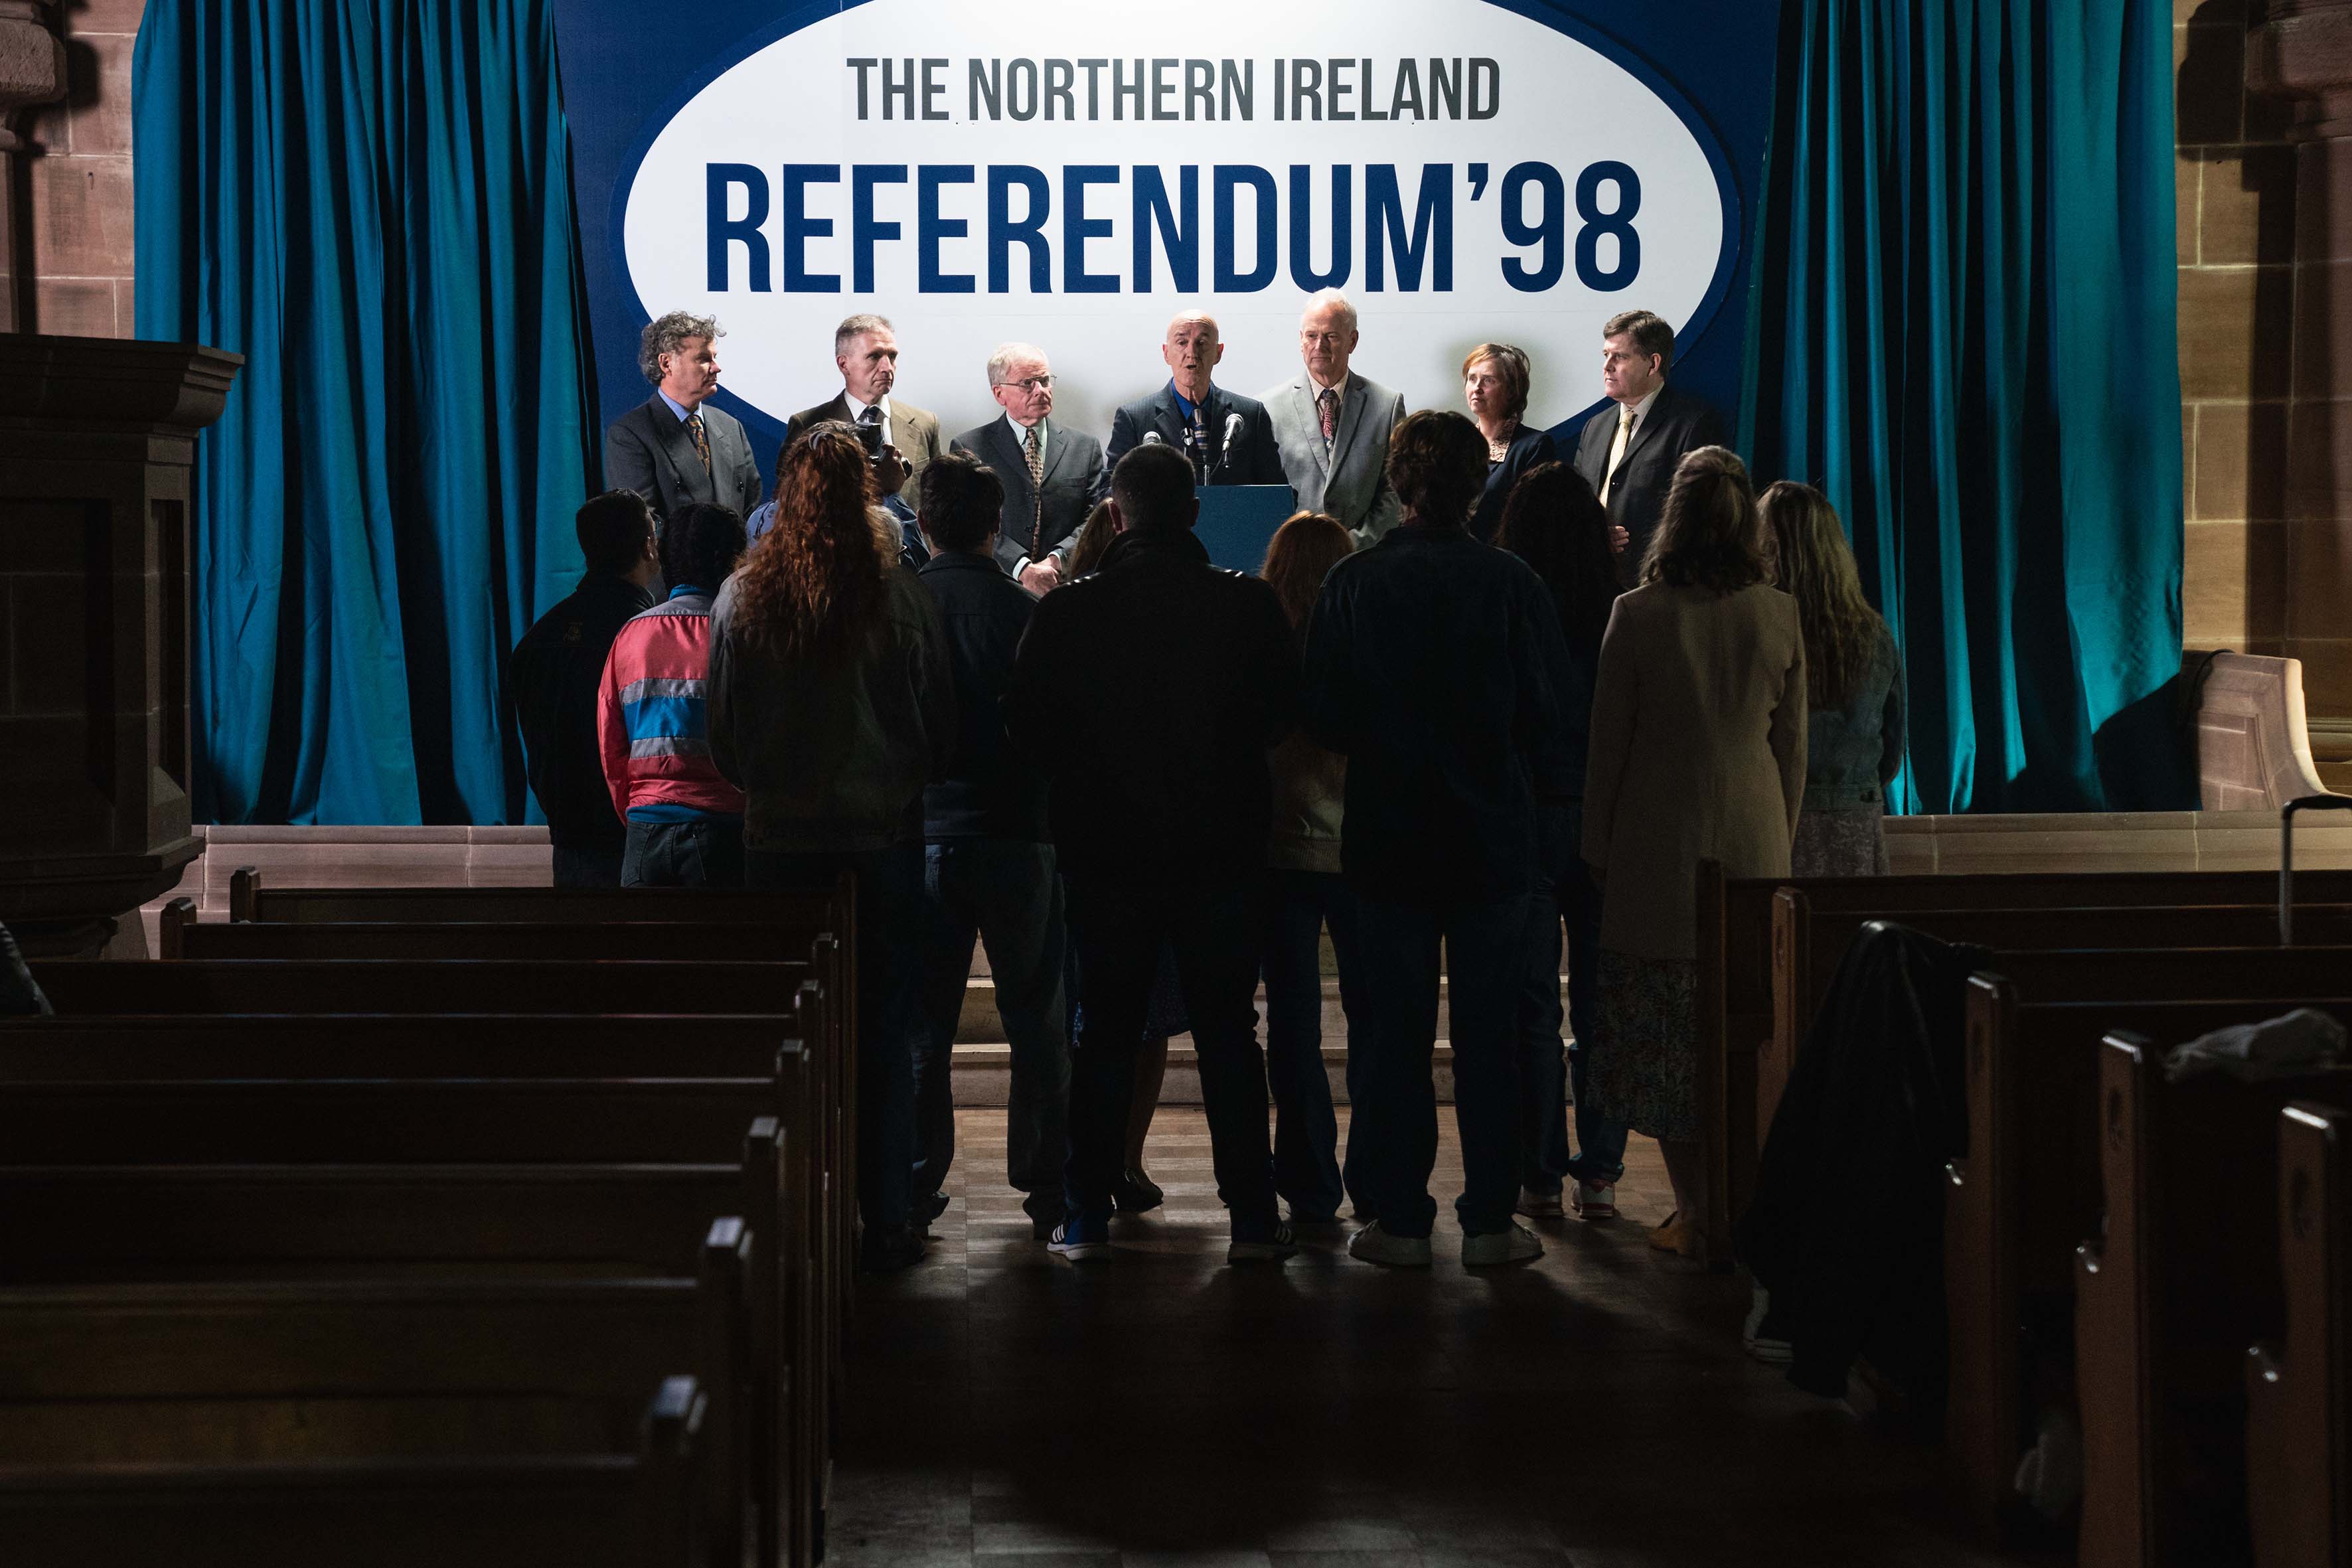 The 1998 referendum played out in the extended ‘Derry Girls’ finale